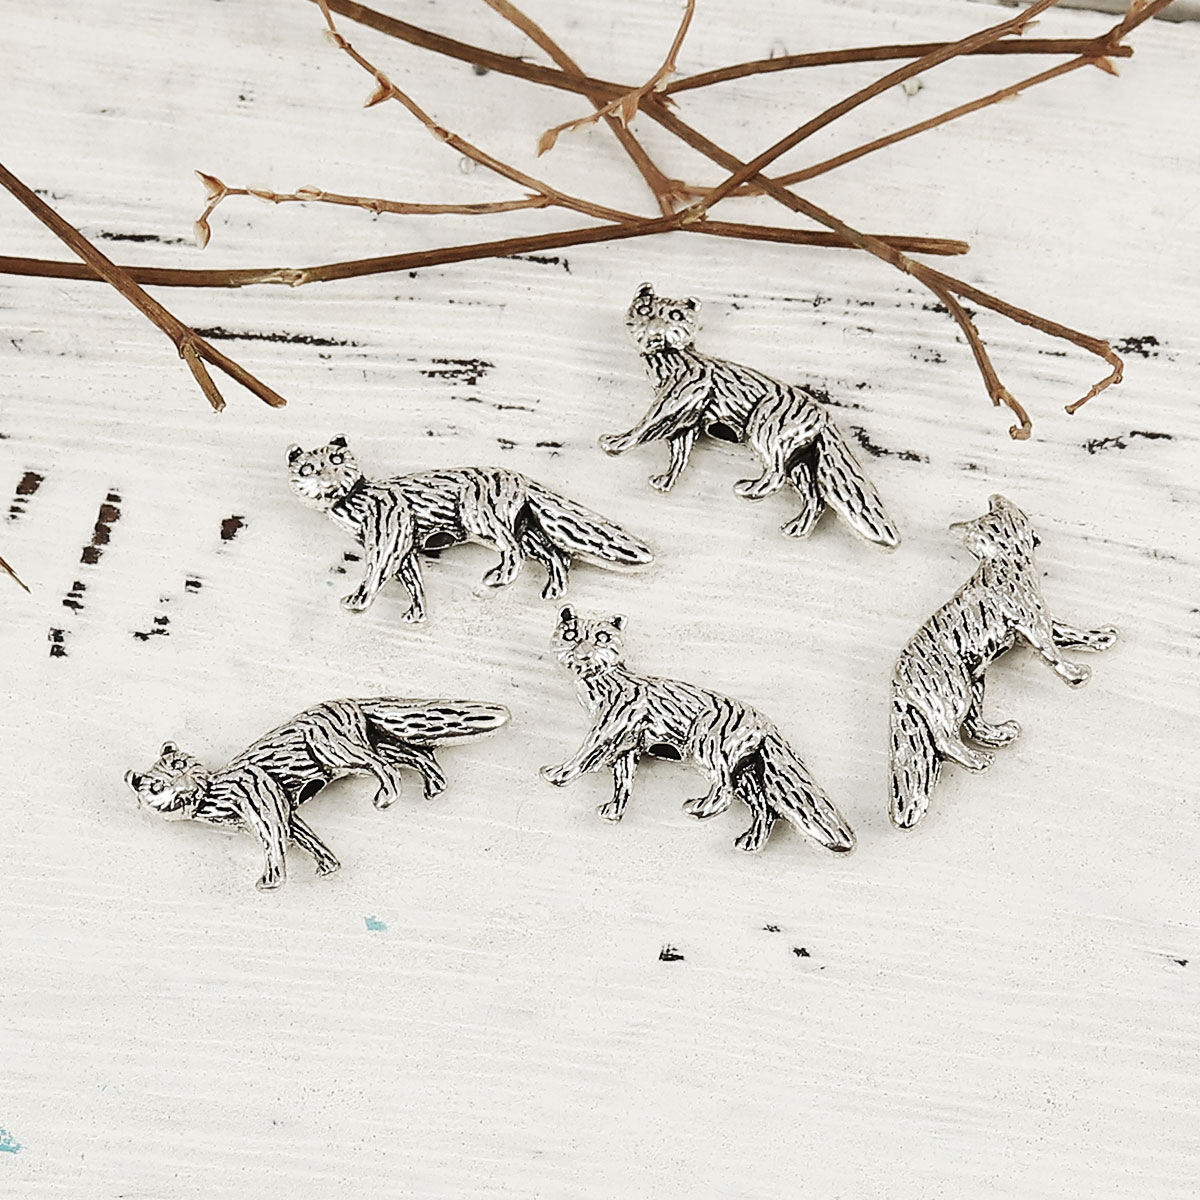 Picture of Zinc Based Alloy 3D Beads Fox Animal Antique Silver 21mm x 12mm, Hole: Approx 1.6mm, 50 PCs